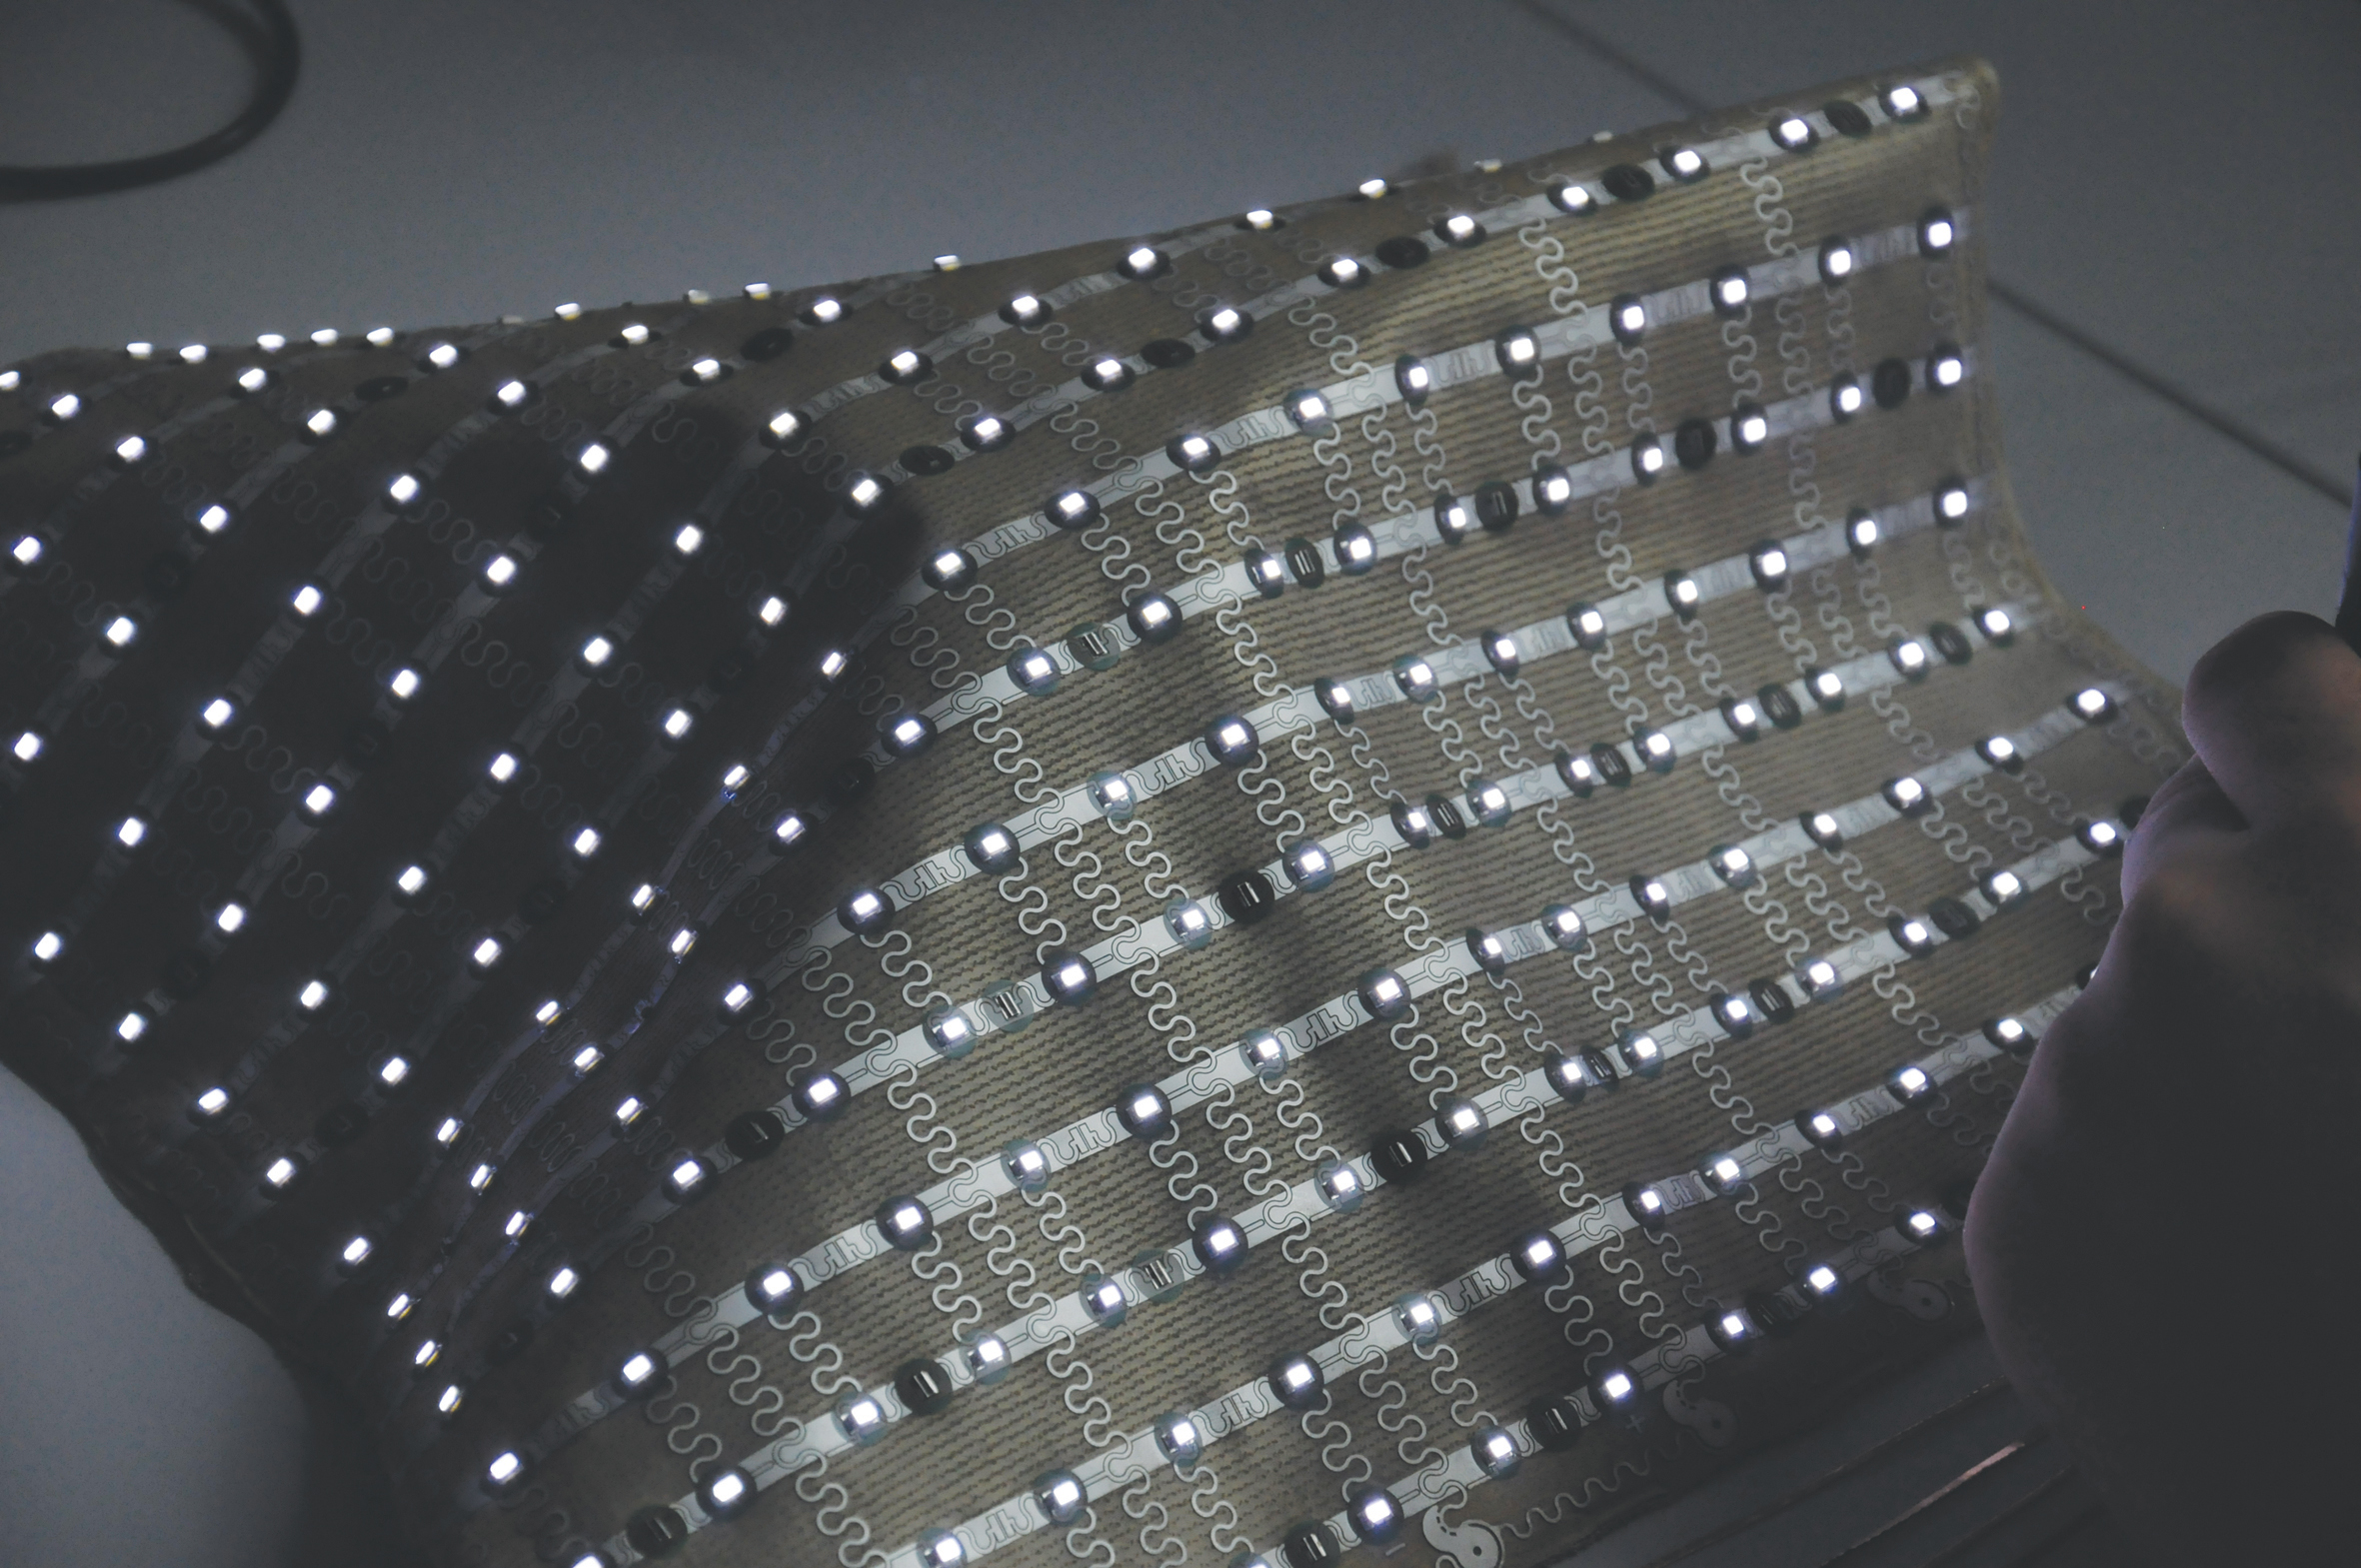   Canvas  (2011)  Textile Light in collaboration with  IZM Fraunhofer Institute , Berlin 